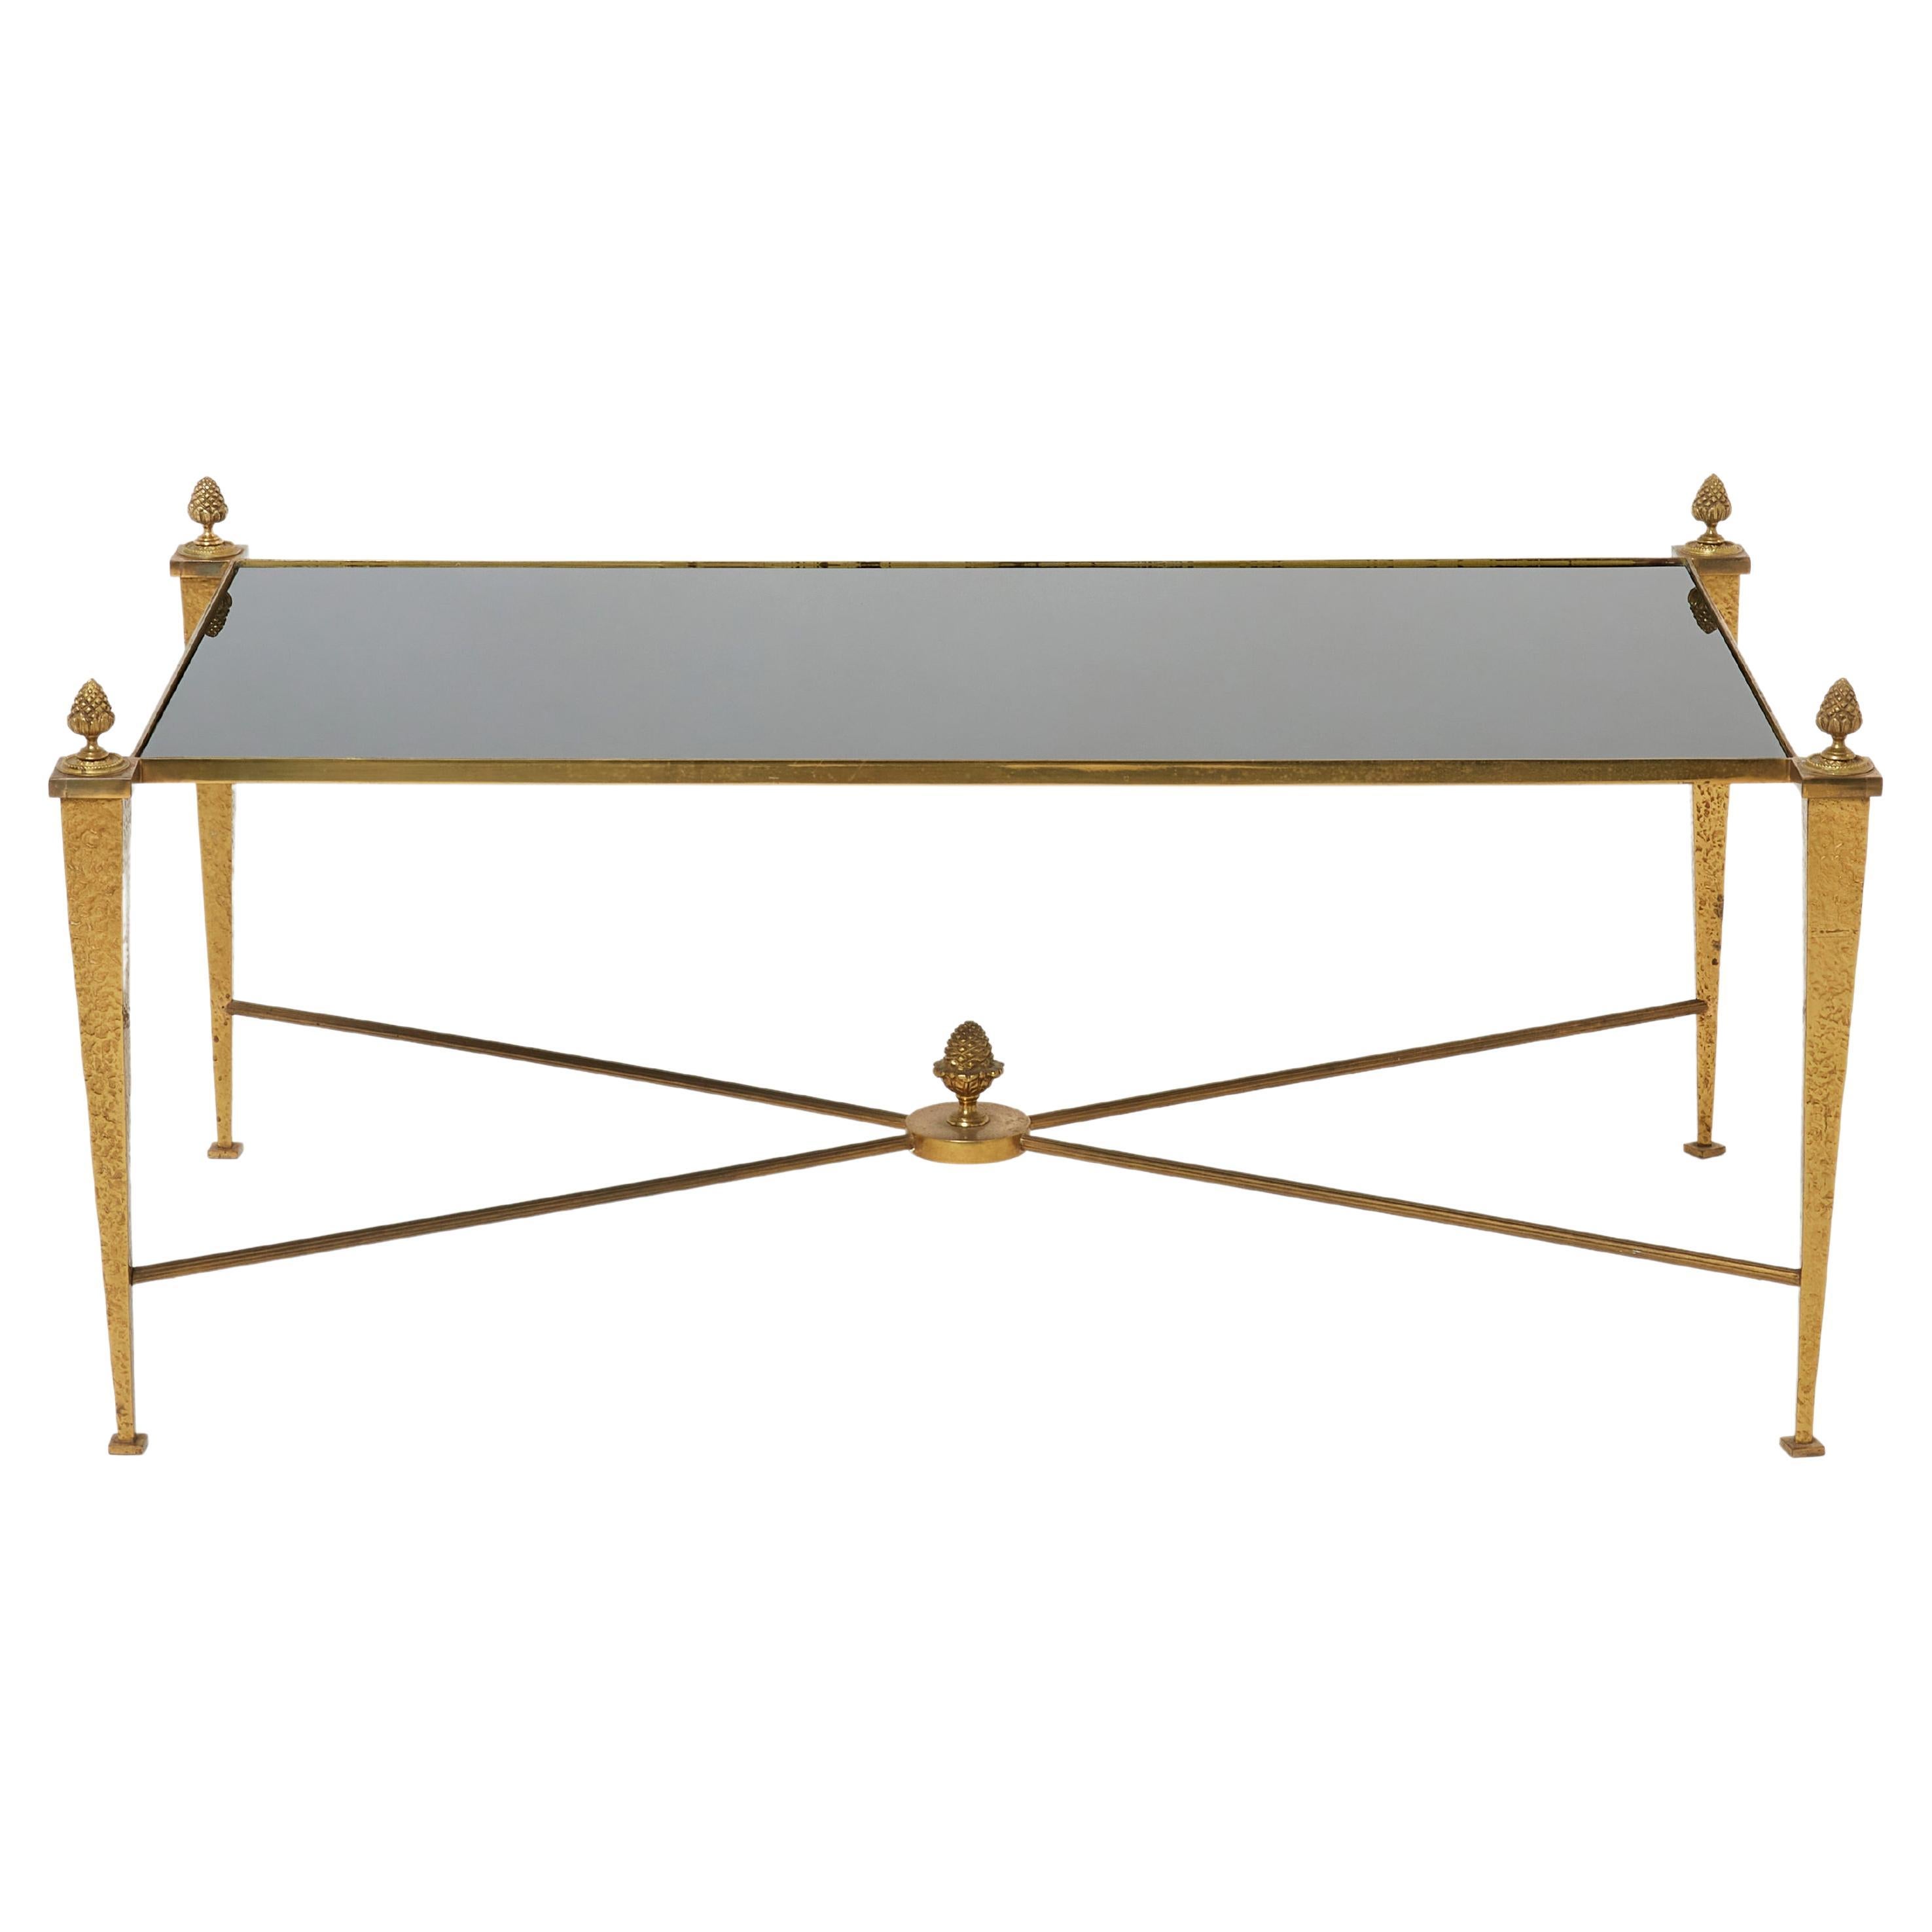 French Maison Ramsay Gilded Wrought Iron Opaline Coffee Table, 1960s For Sale